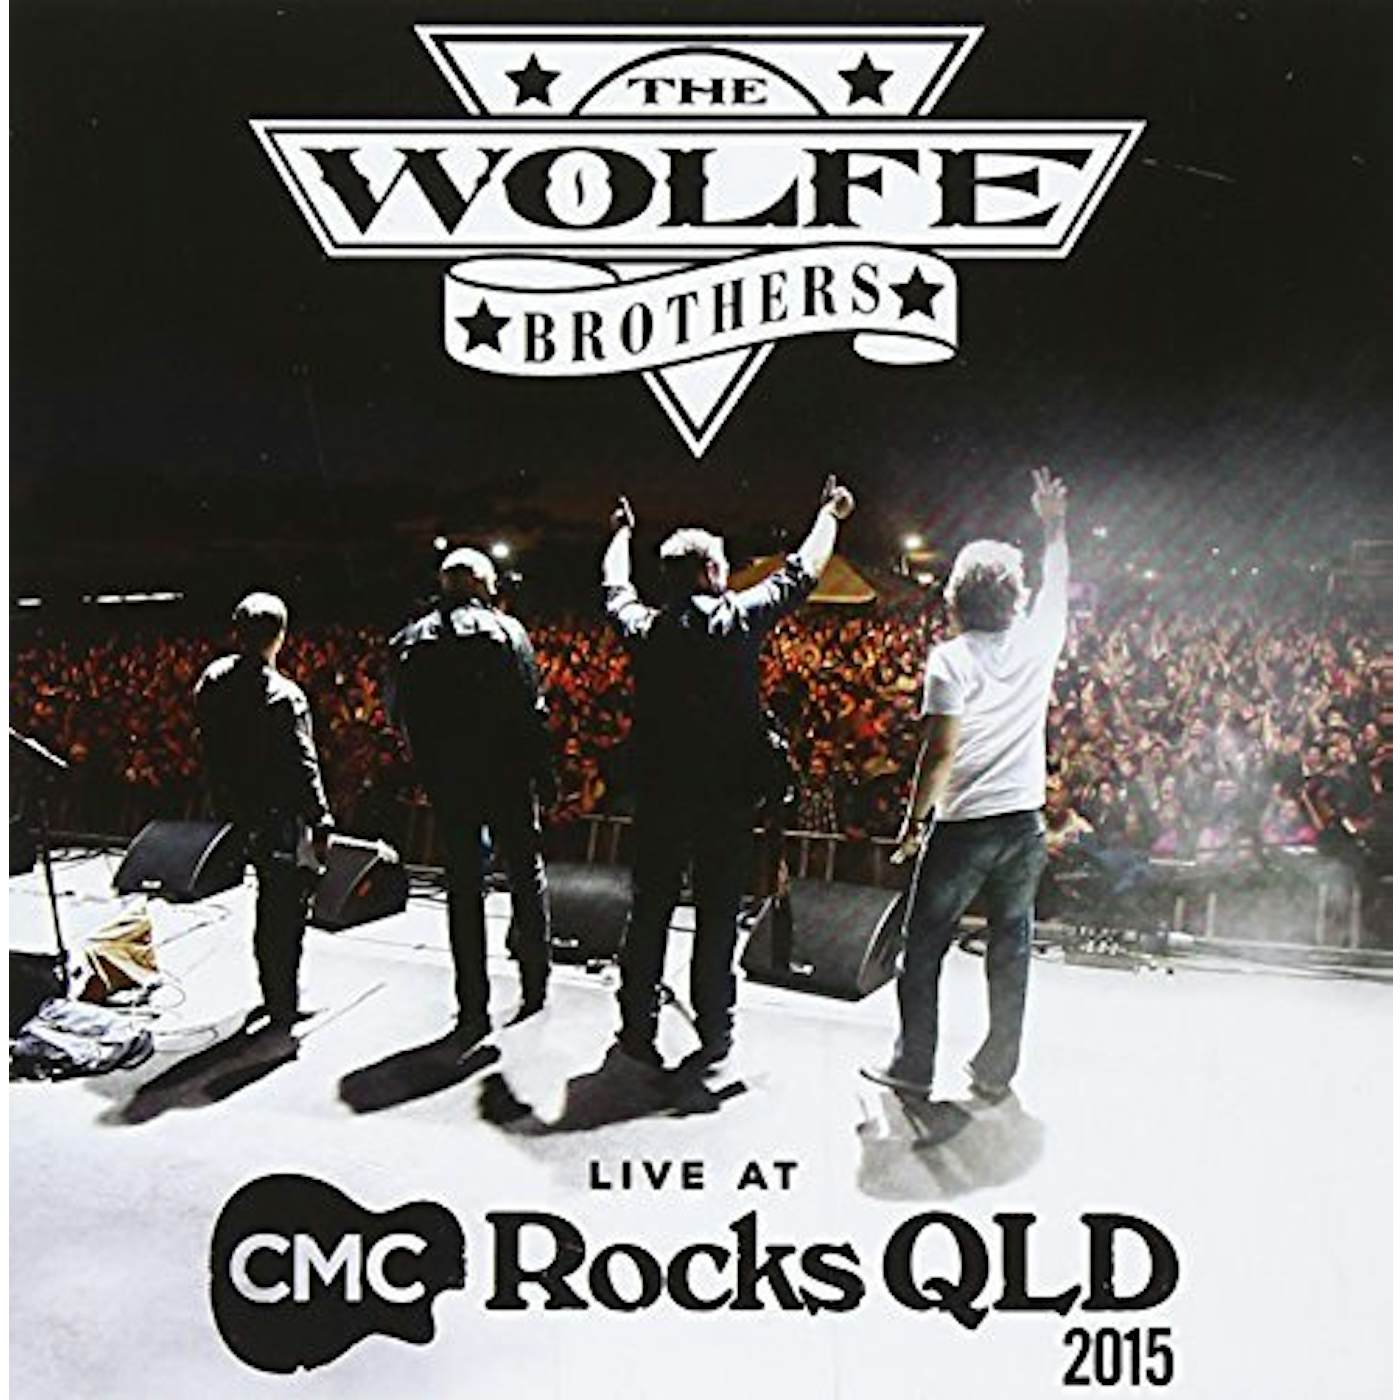 The Wolfe Brothers: LIVE AT CMC ROCKS QLD 2015 CD